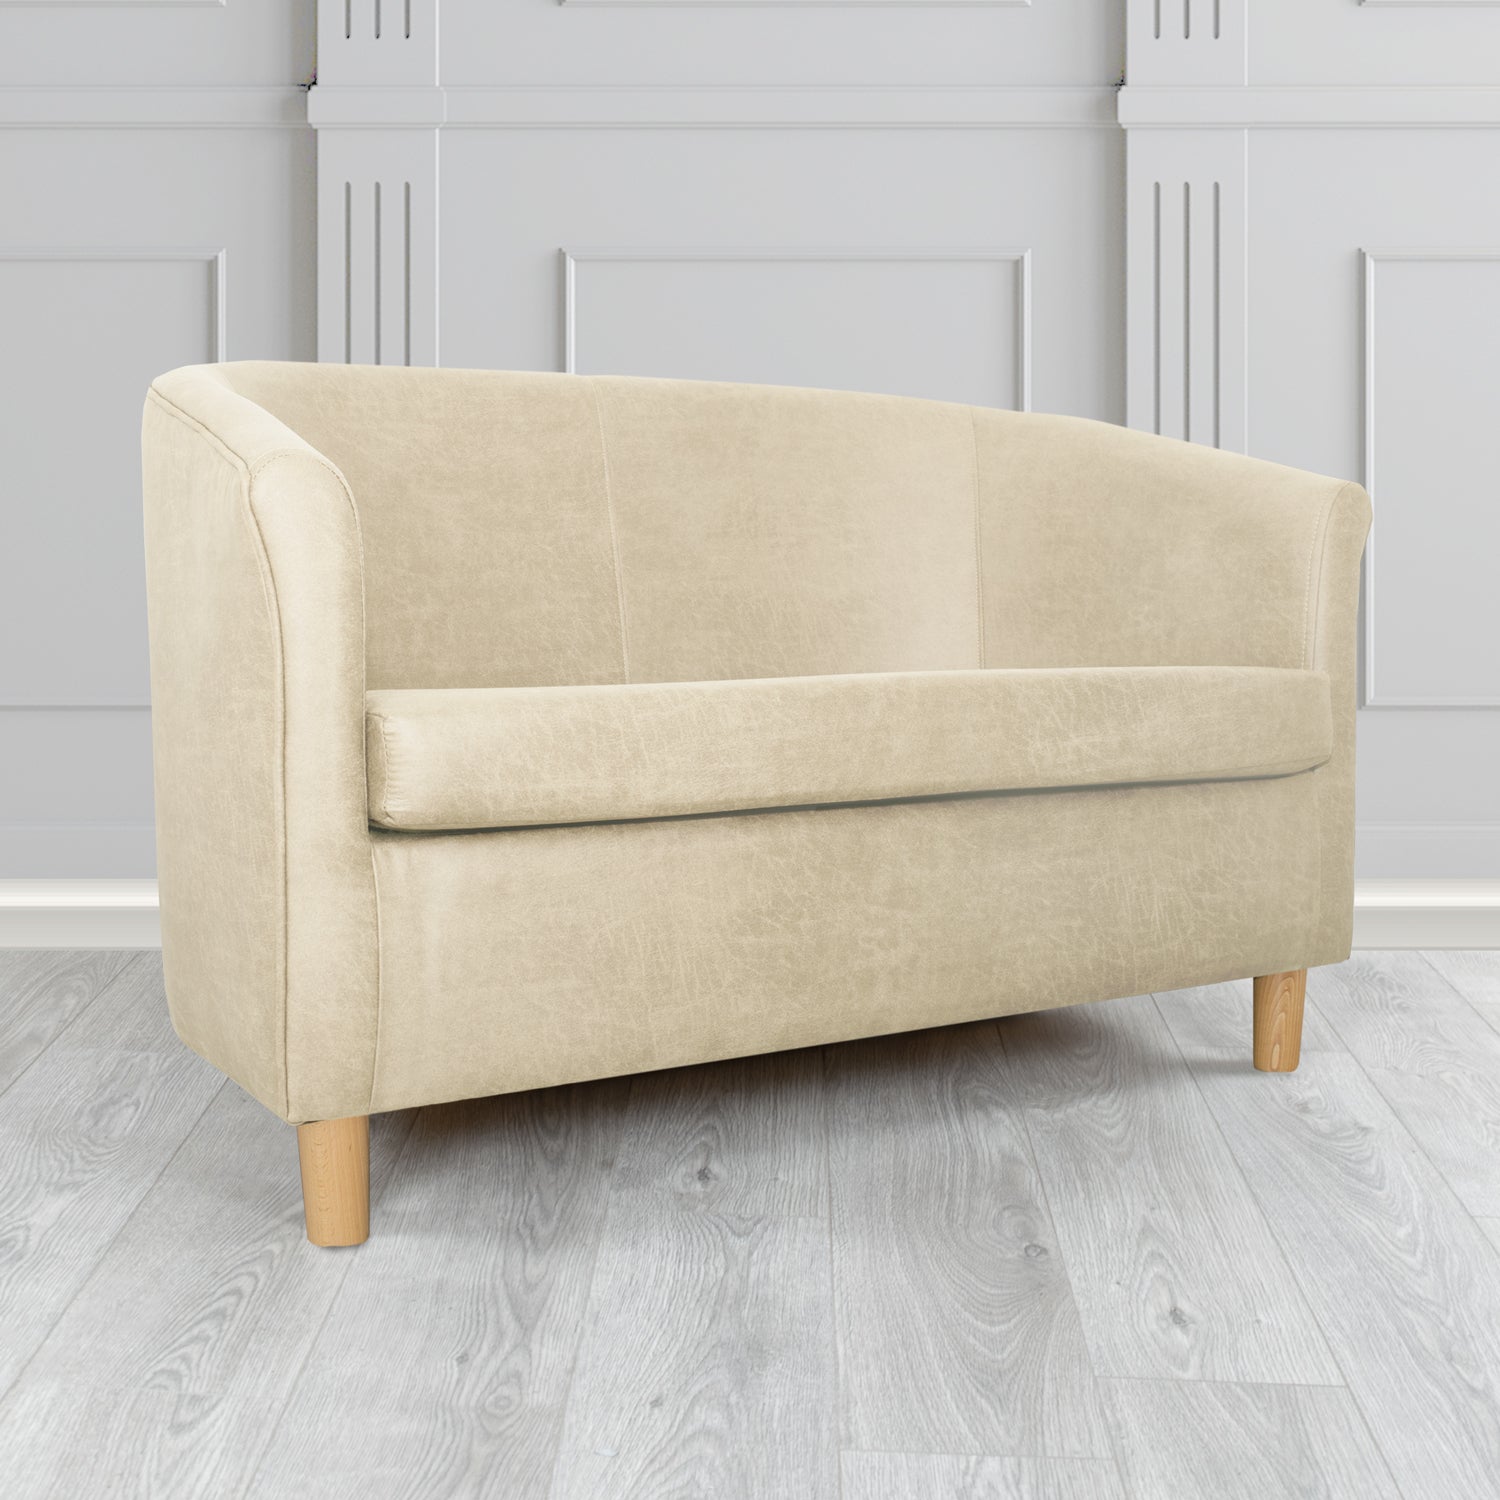 Tuscany 2 Seater Tub Sofa in Nevada Beige Faux Leather - The Tub Chair Shop